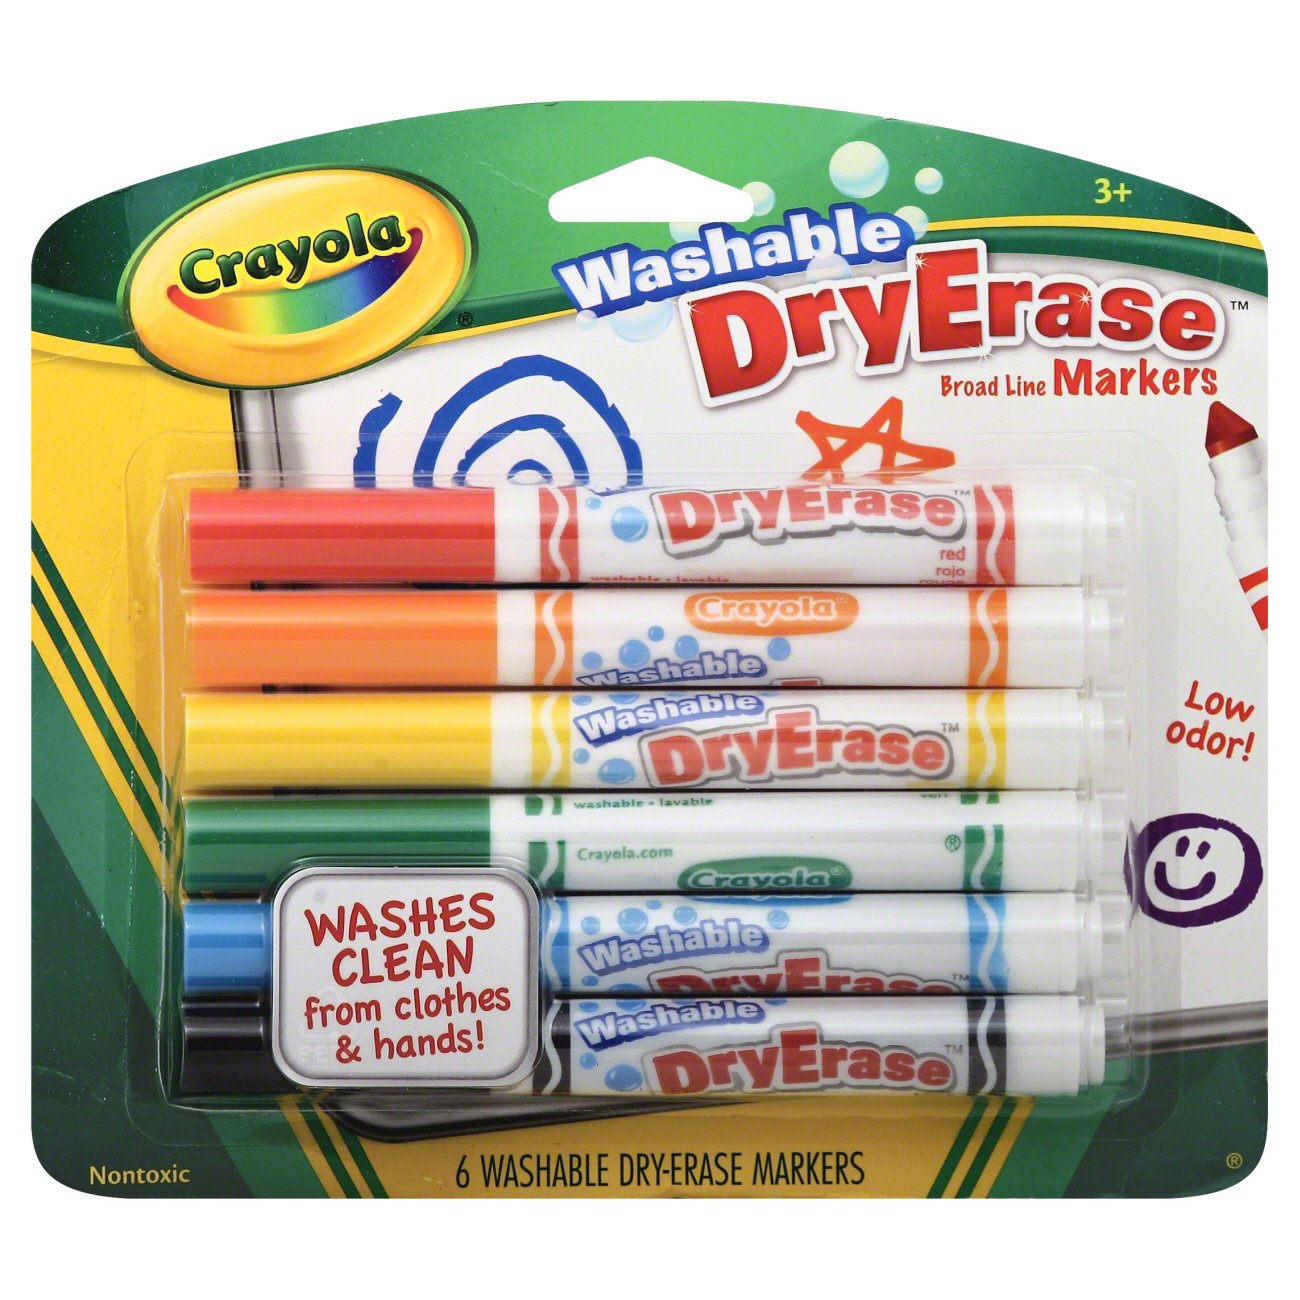 Crayola Washable Dry Erase Broad Line Markers - Shop Markers at H-E-B